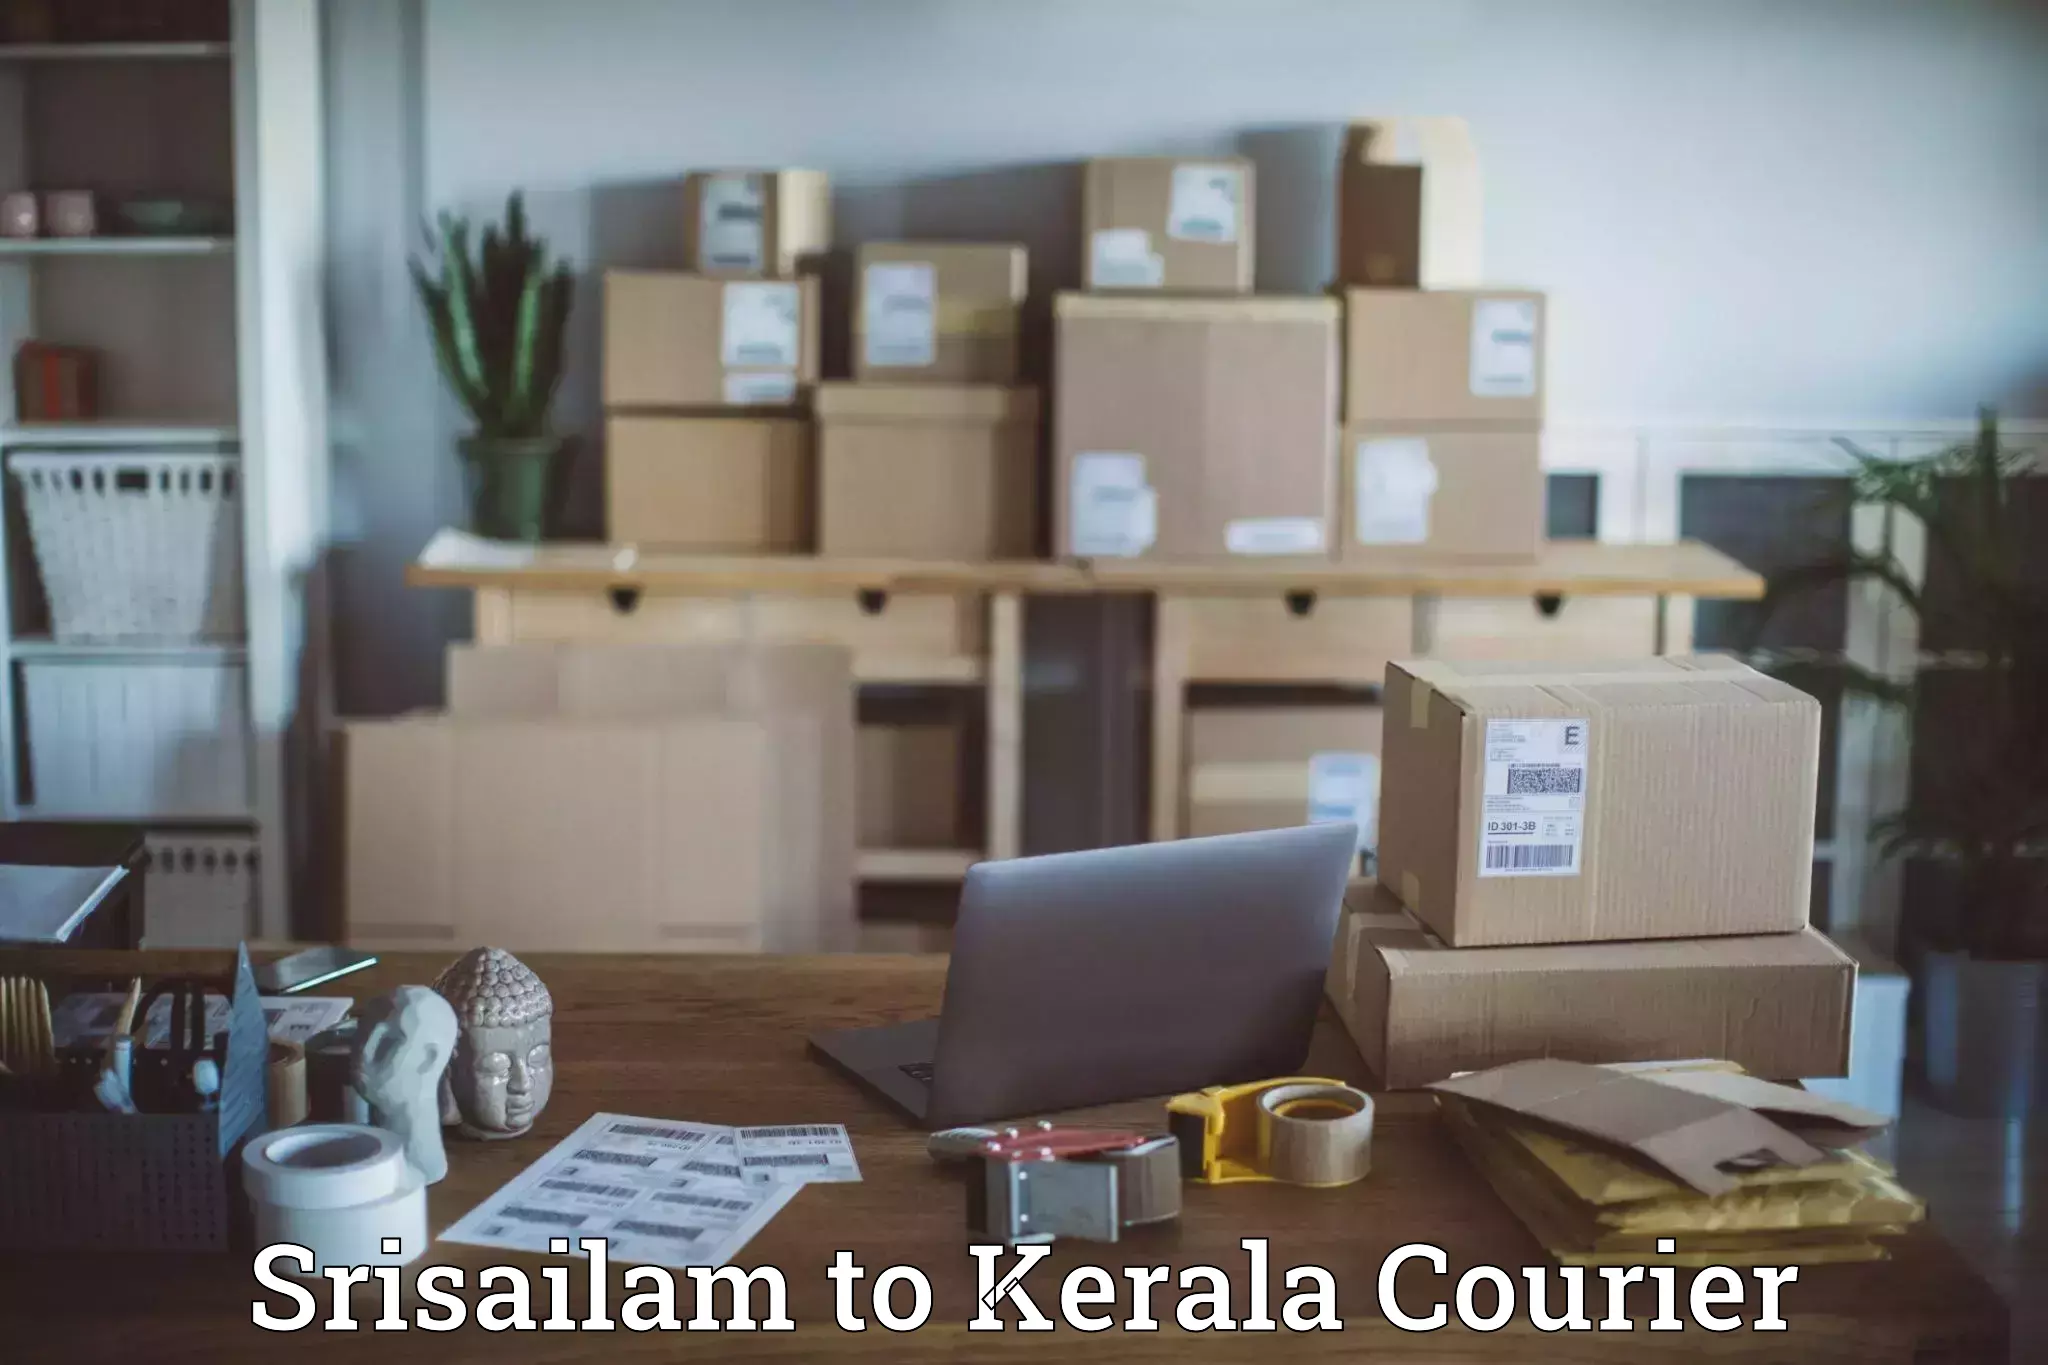 Express delivery capabilities Srisailam to Kottayam